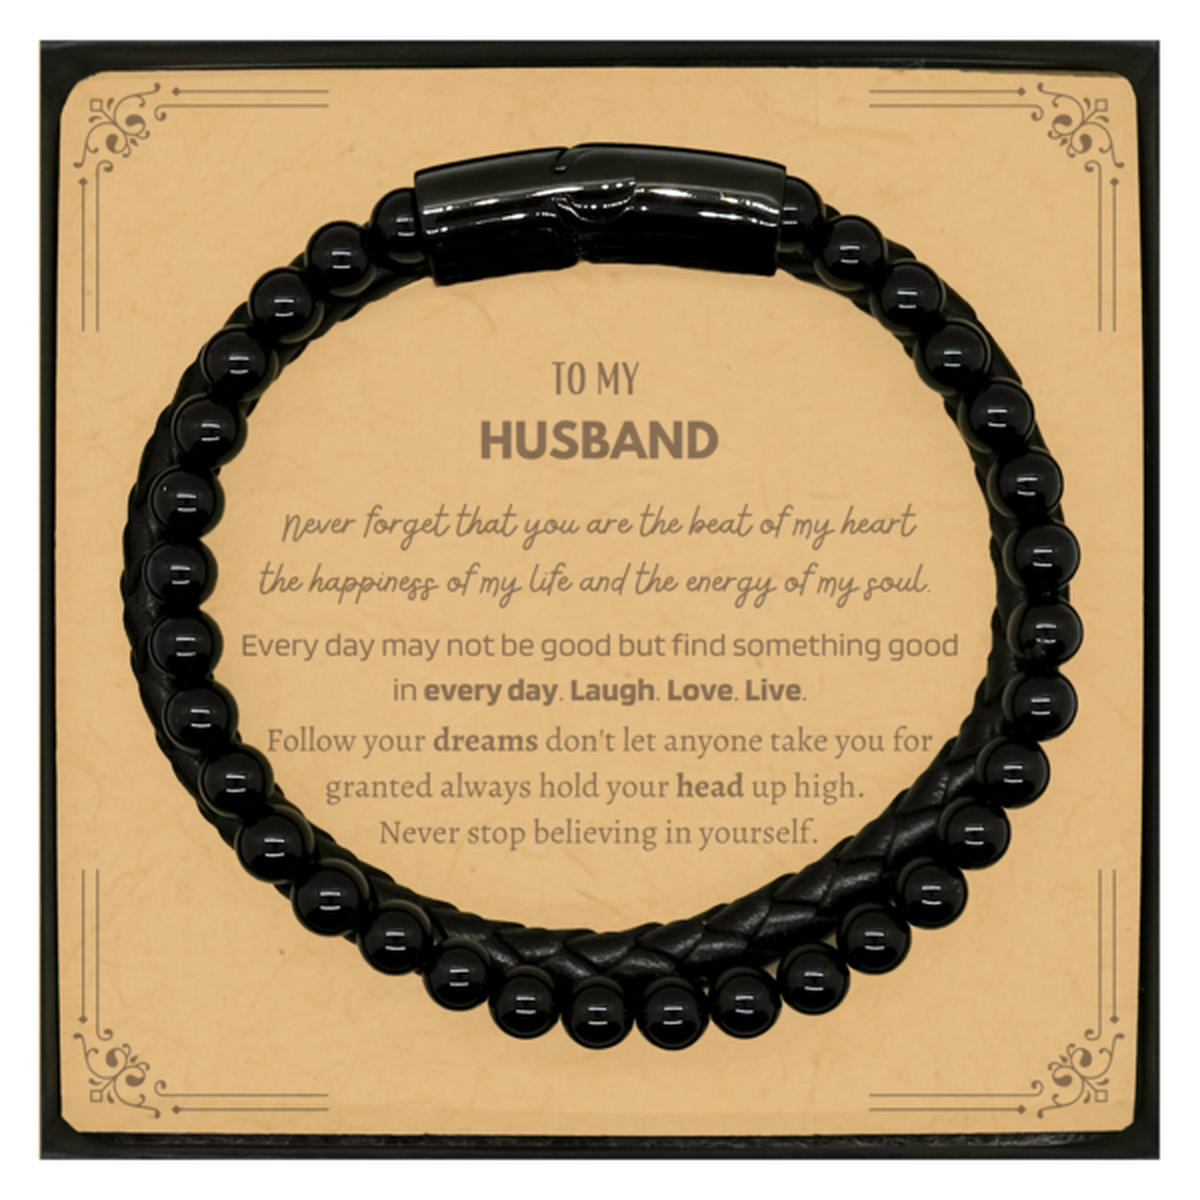 To My Husband Message Card Gifts, Christmas Husband Stone Leather Bracelets Present, Birthday Unique Motivational For Husband, To My Husband Never forget that you are the beat of my heart the happiness of my life and the energy of my soul